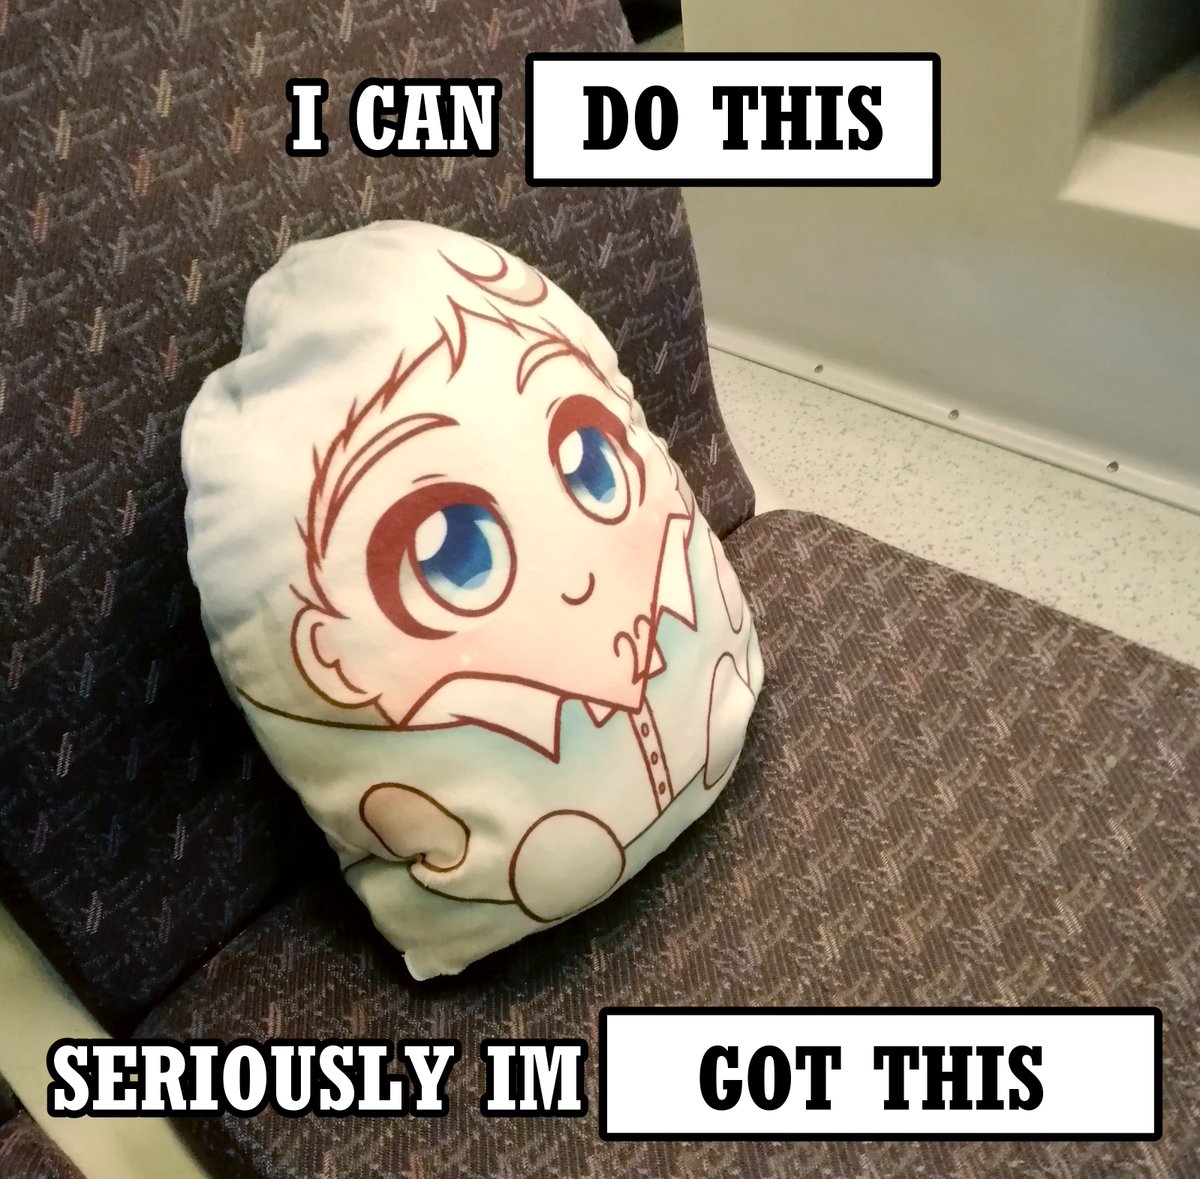 i did the meme with my norman plushie